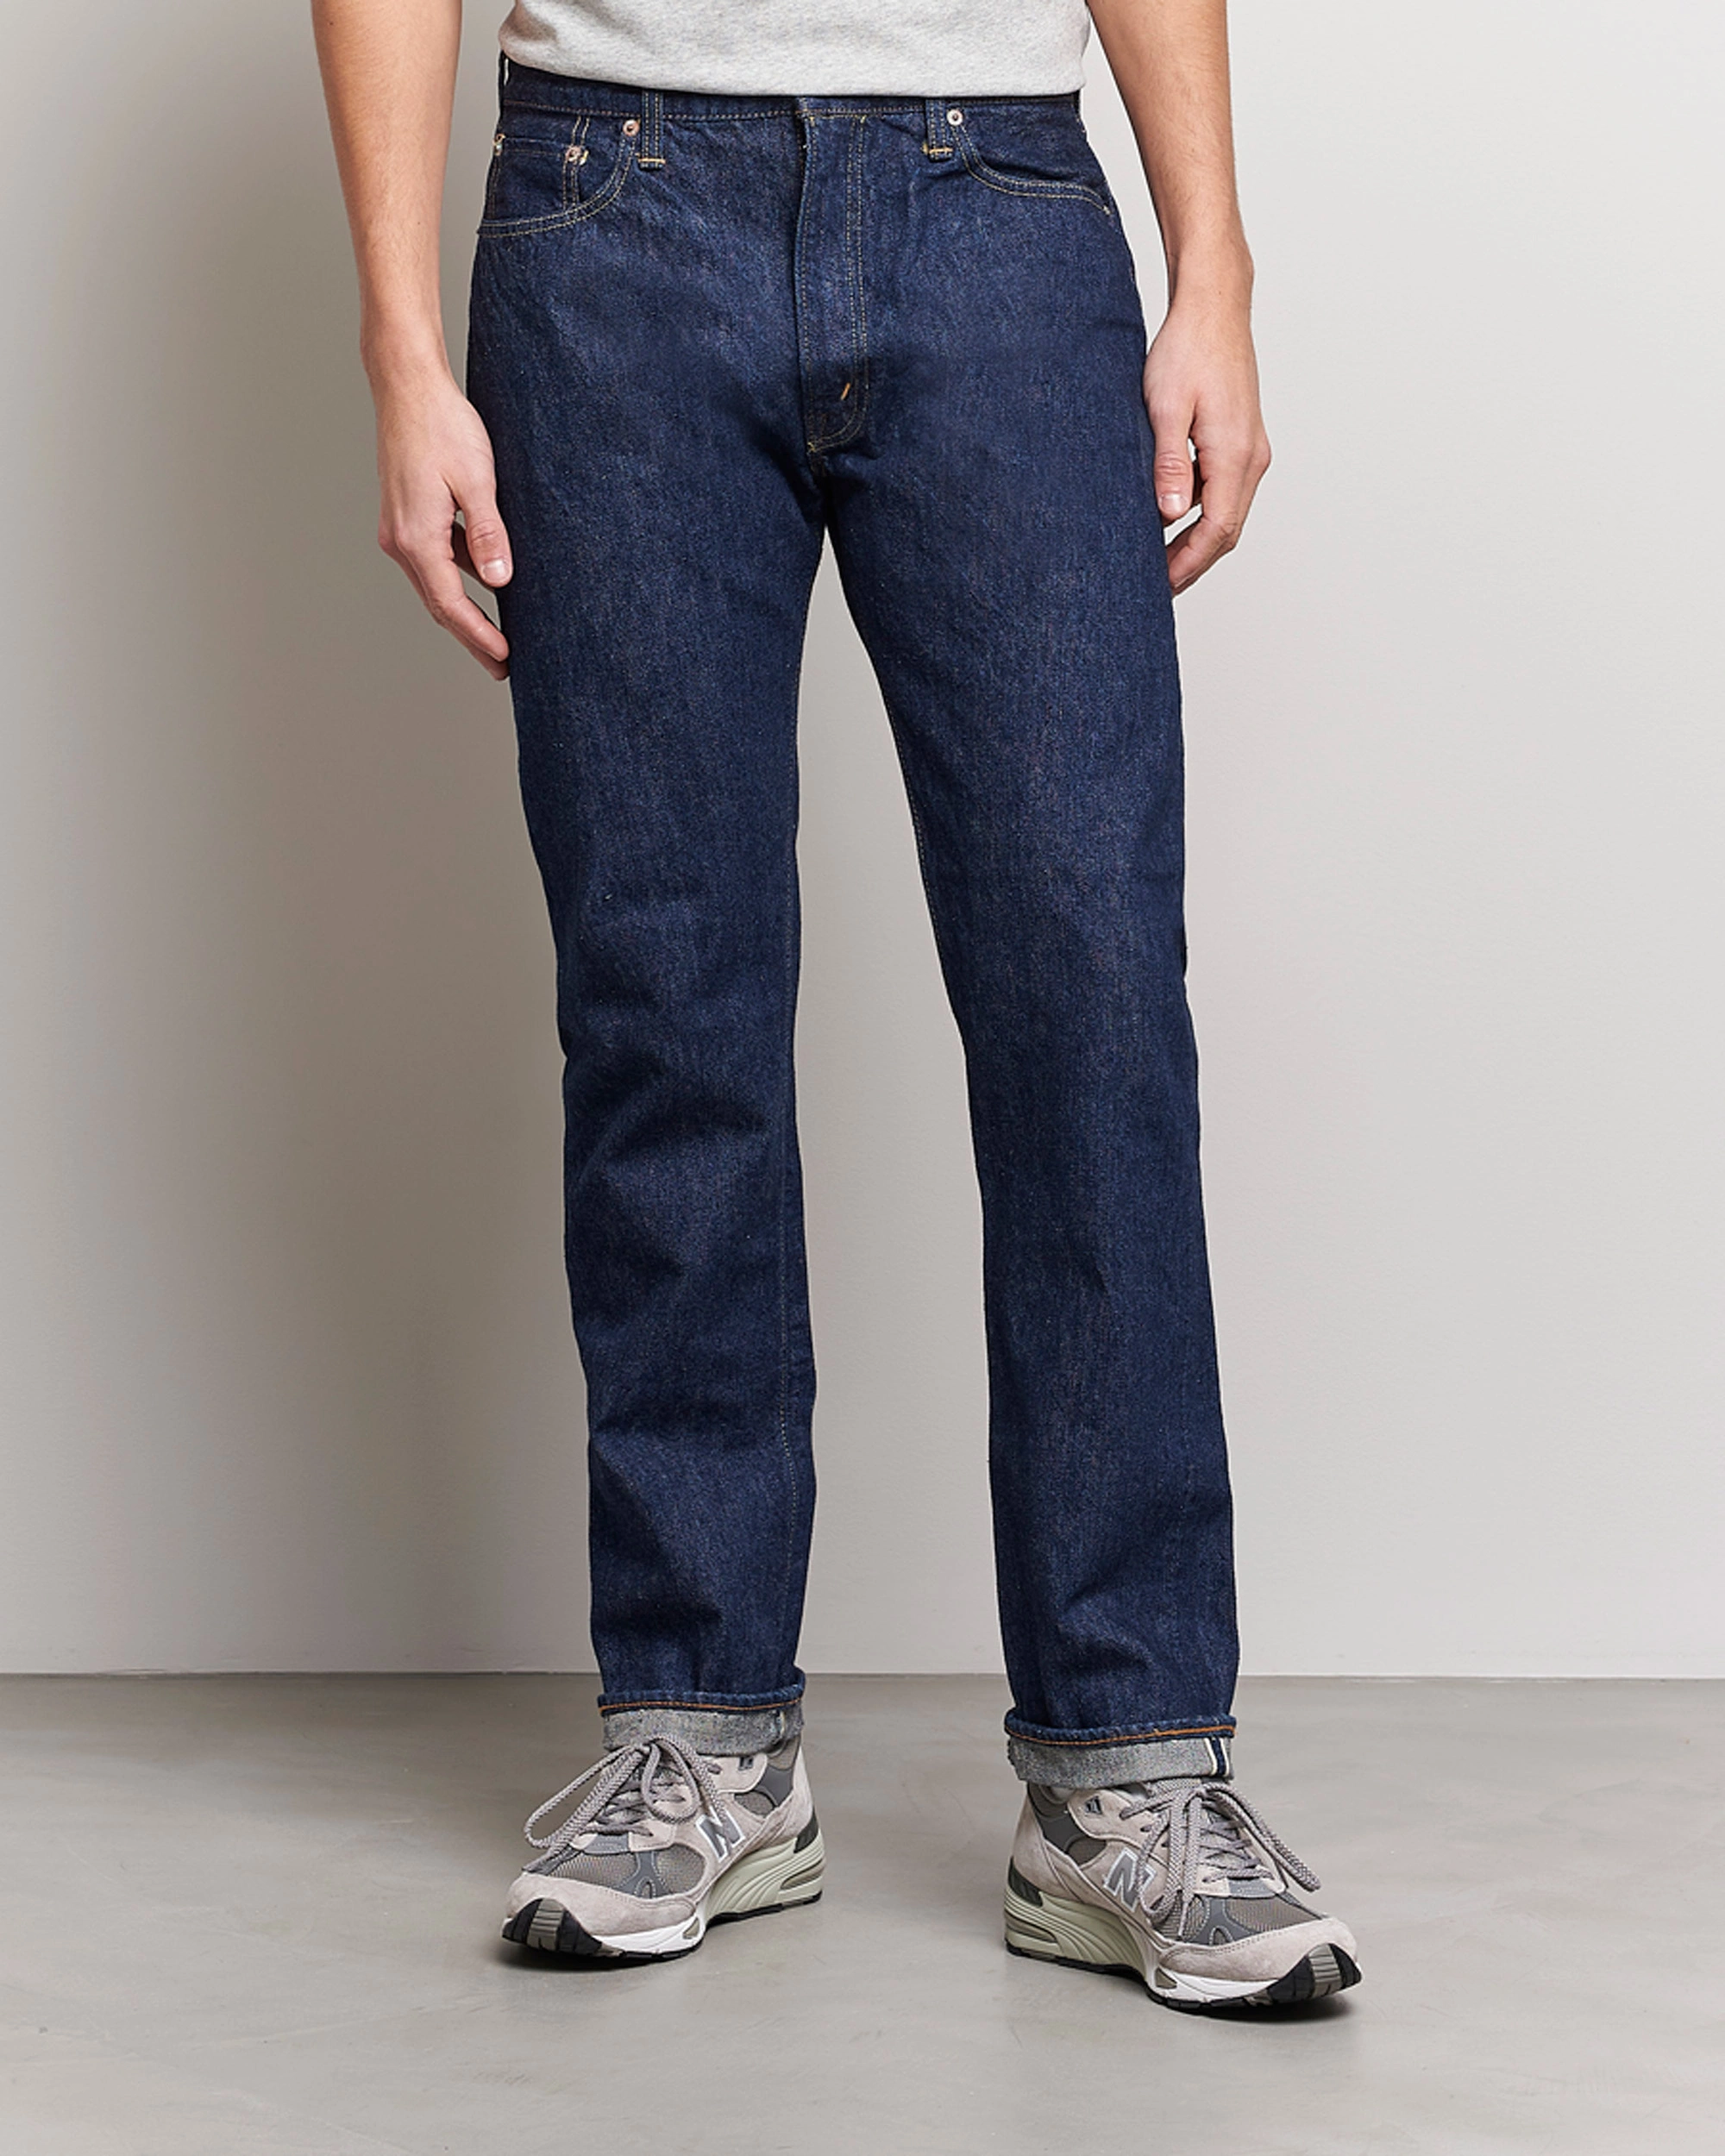 Mies | Japanese Department | orSlow | Tapered Fit 107 Selvedge Jeans One Wash